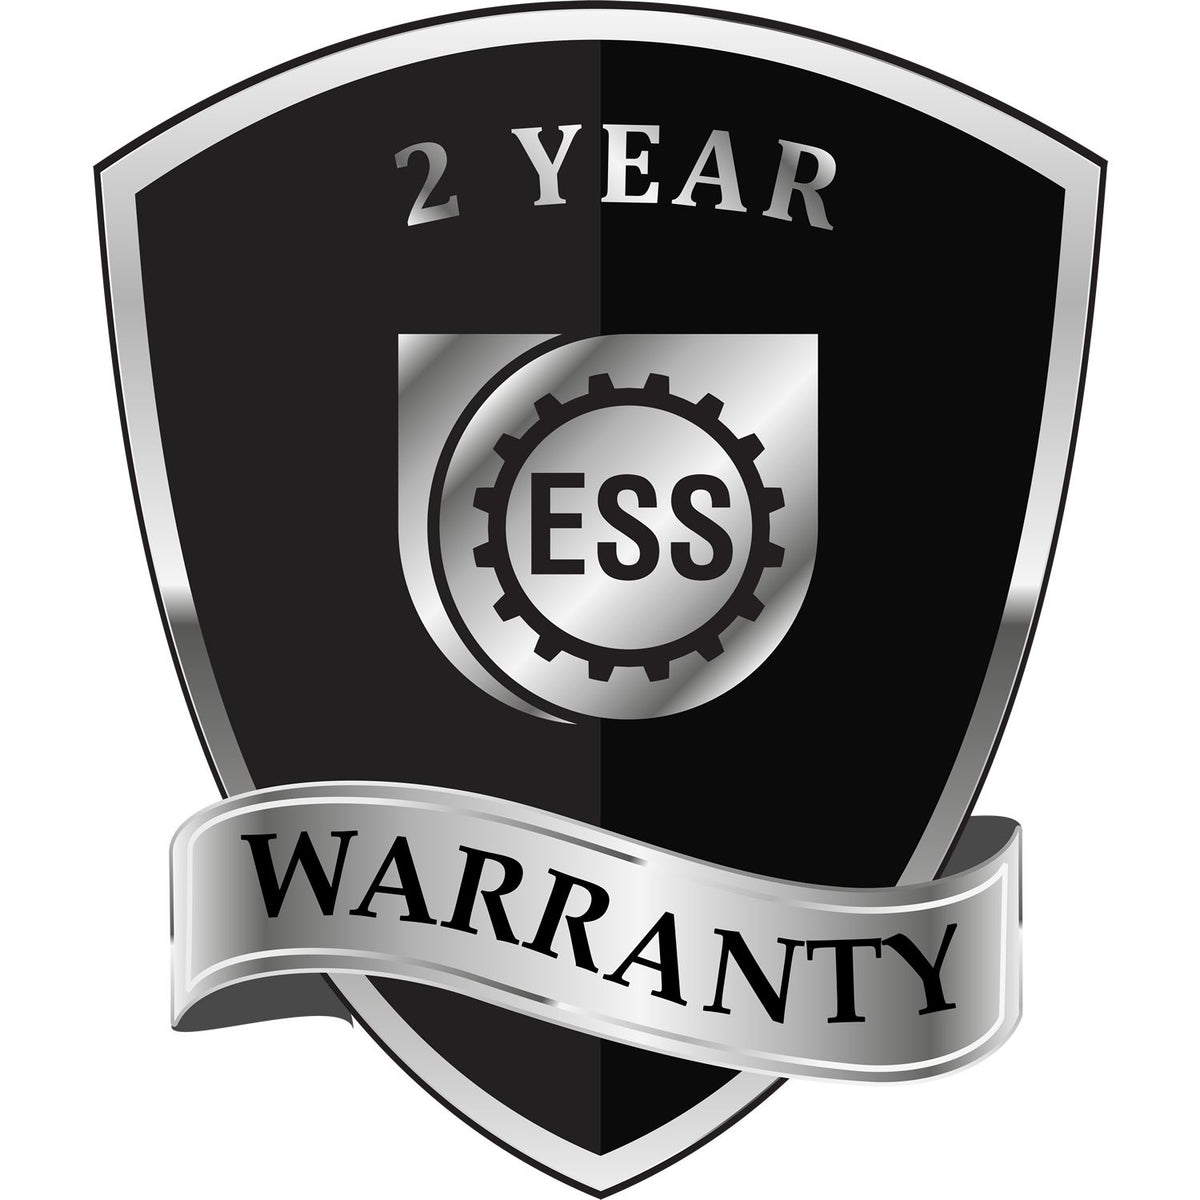 A black and silver badge or emblem showing warranty information for the Gift New Mexico Engineer Seal